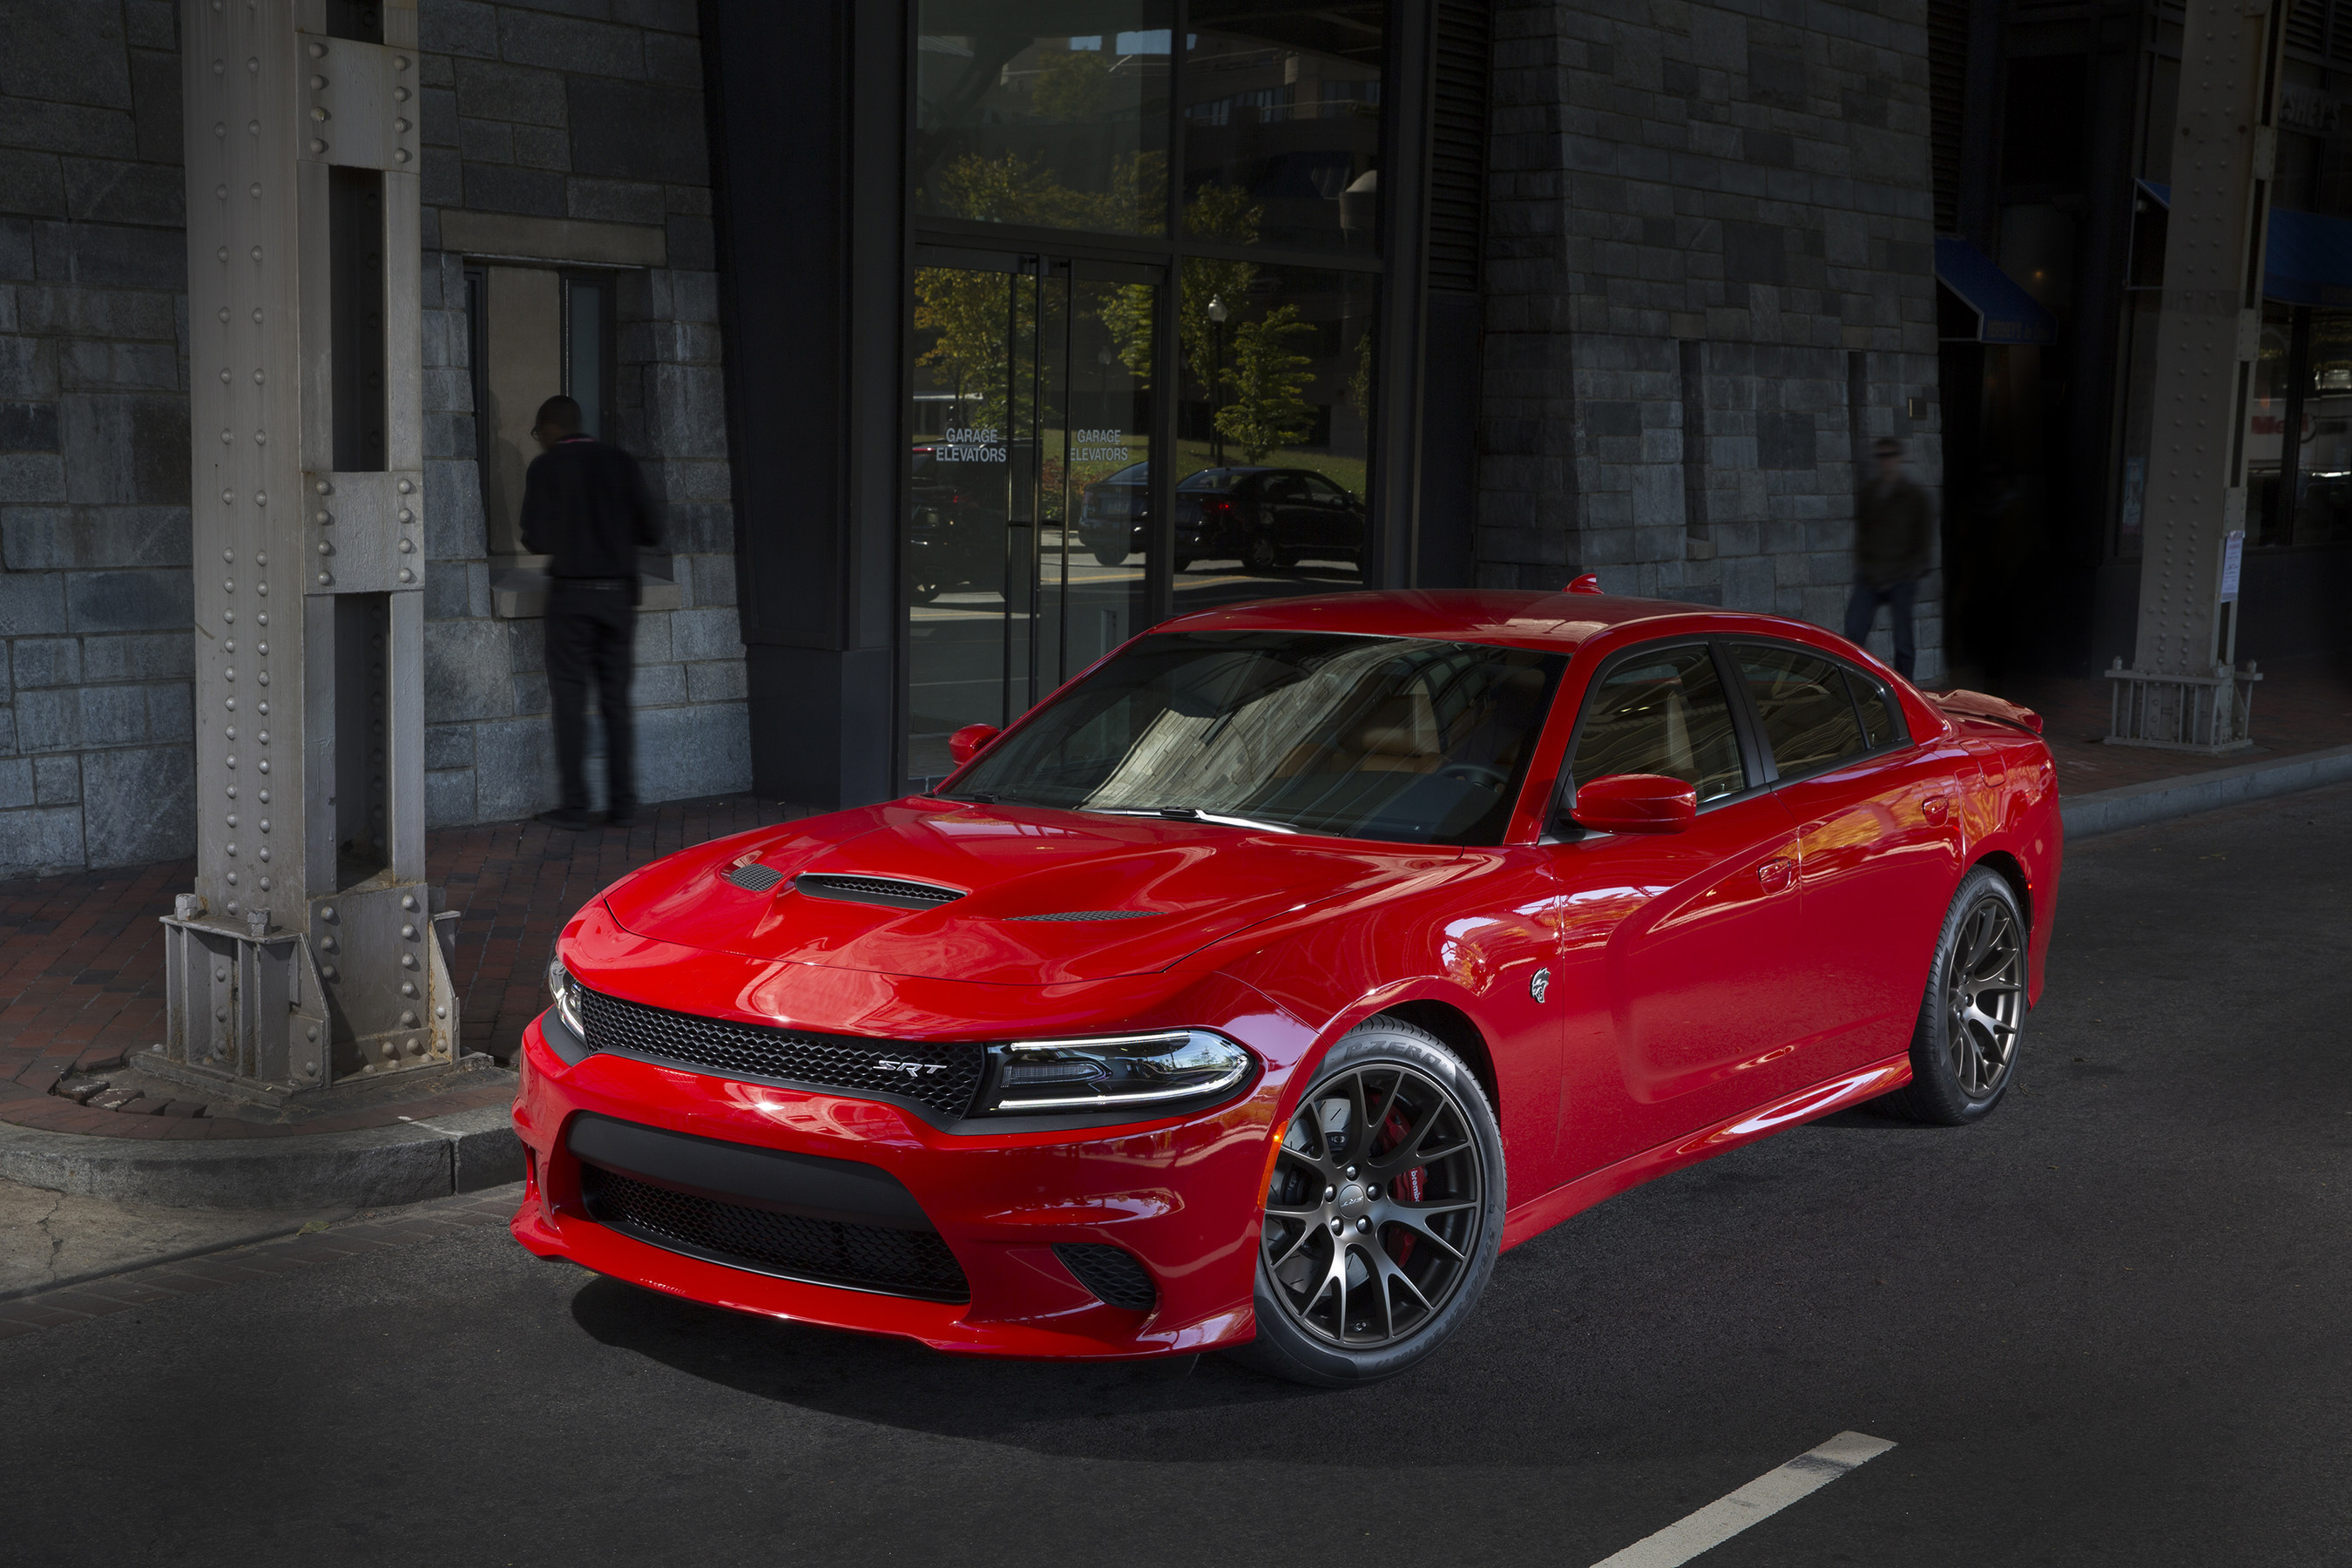 In its auto show debut at the 2014 South Florida International Auto Show in Miami, the 2015 Dodge Charger SRT Hellcat was awarded the "Star of the Show" from the Southern Automotive Media Association (SAMA).